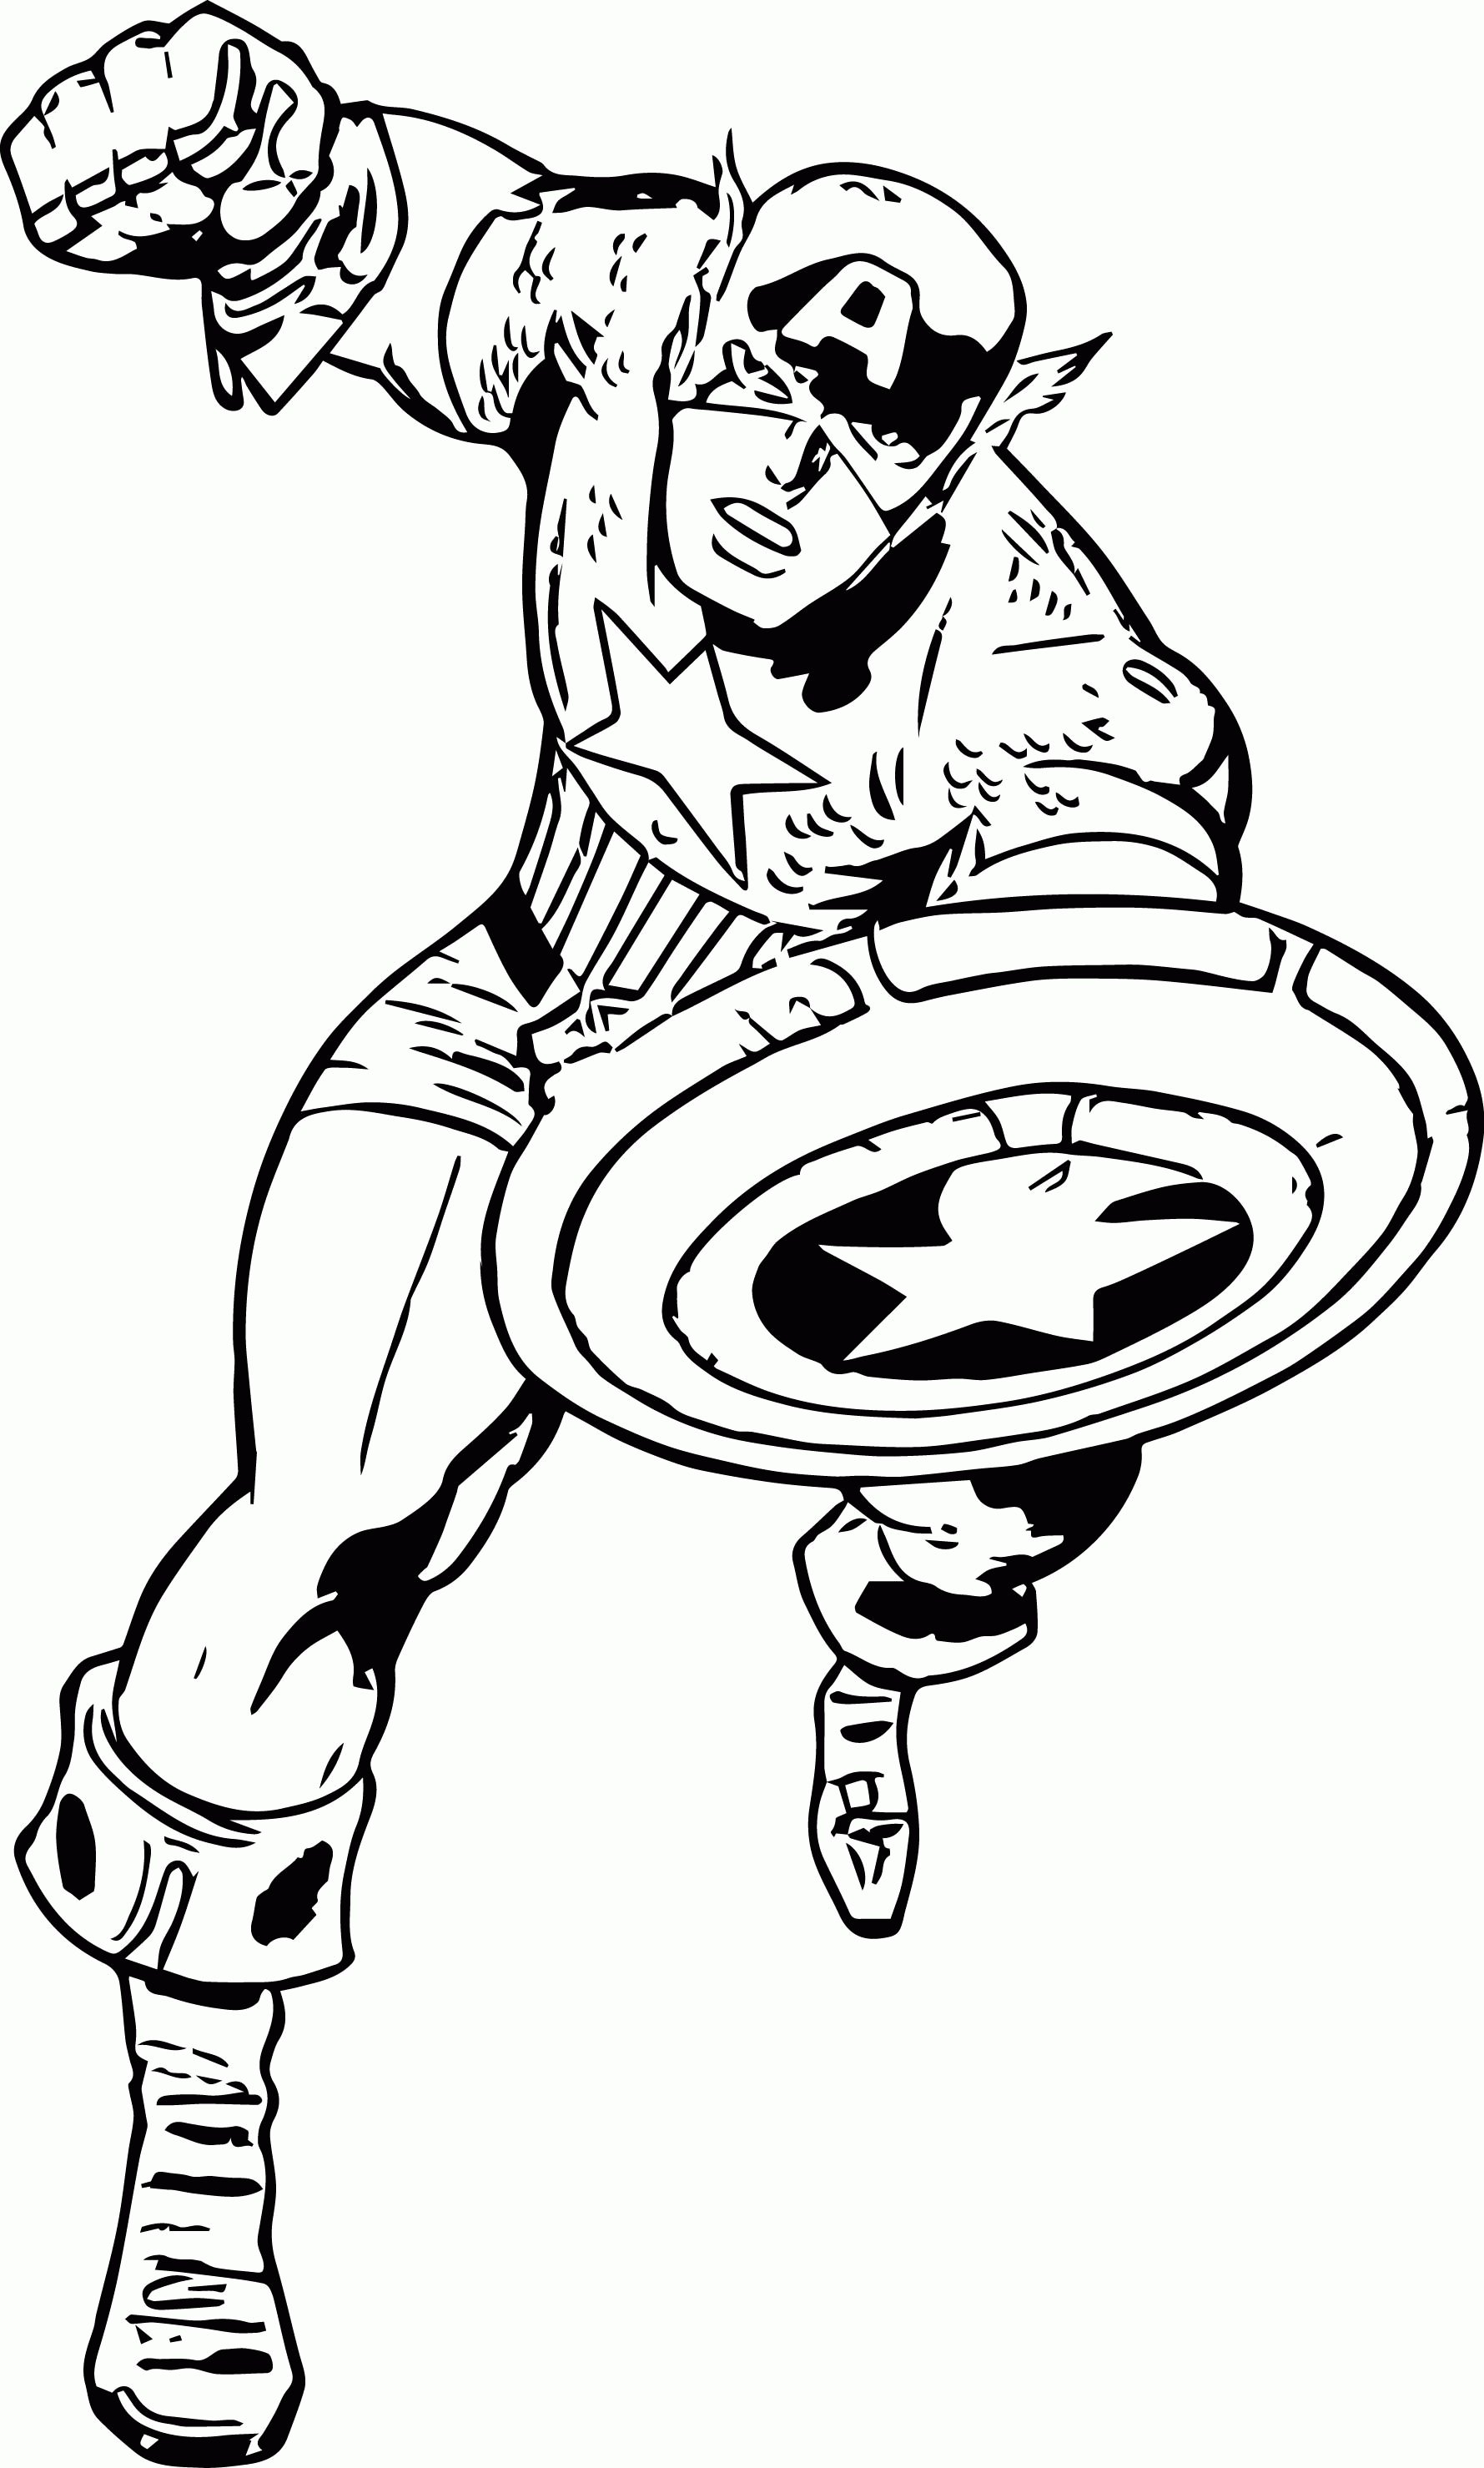 Captain America Face Coloring Pages - Coloring Home